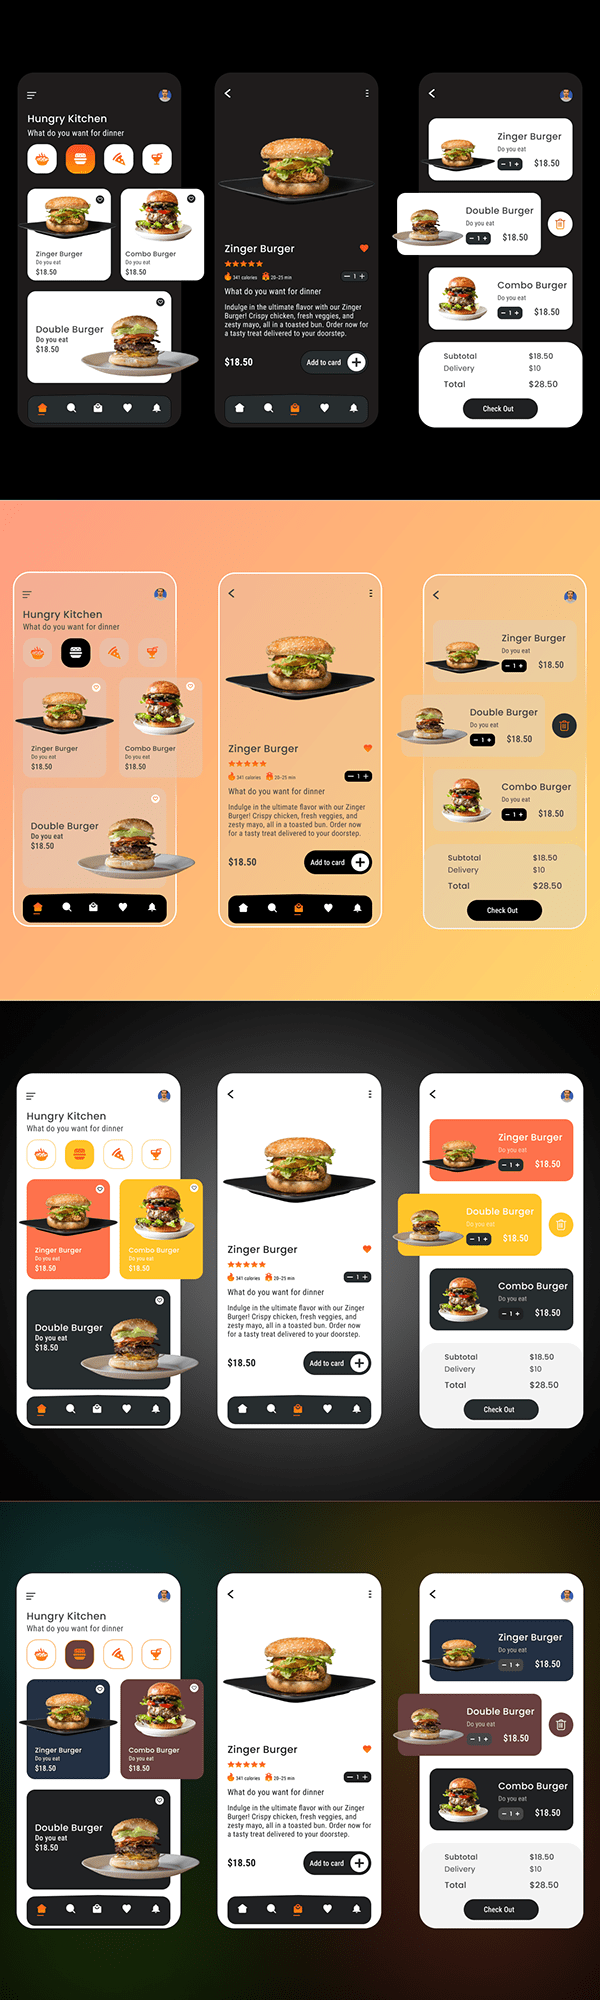 Deliciously Designed: Trend setting UX/UI Food App